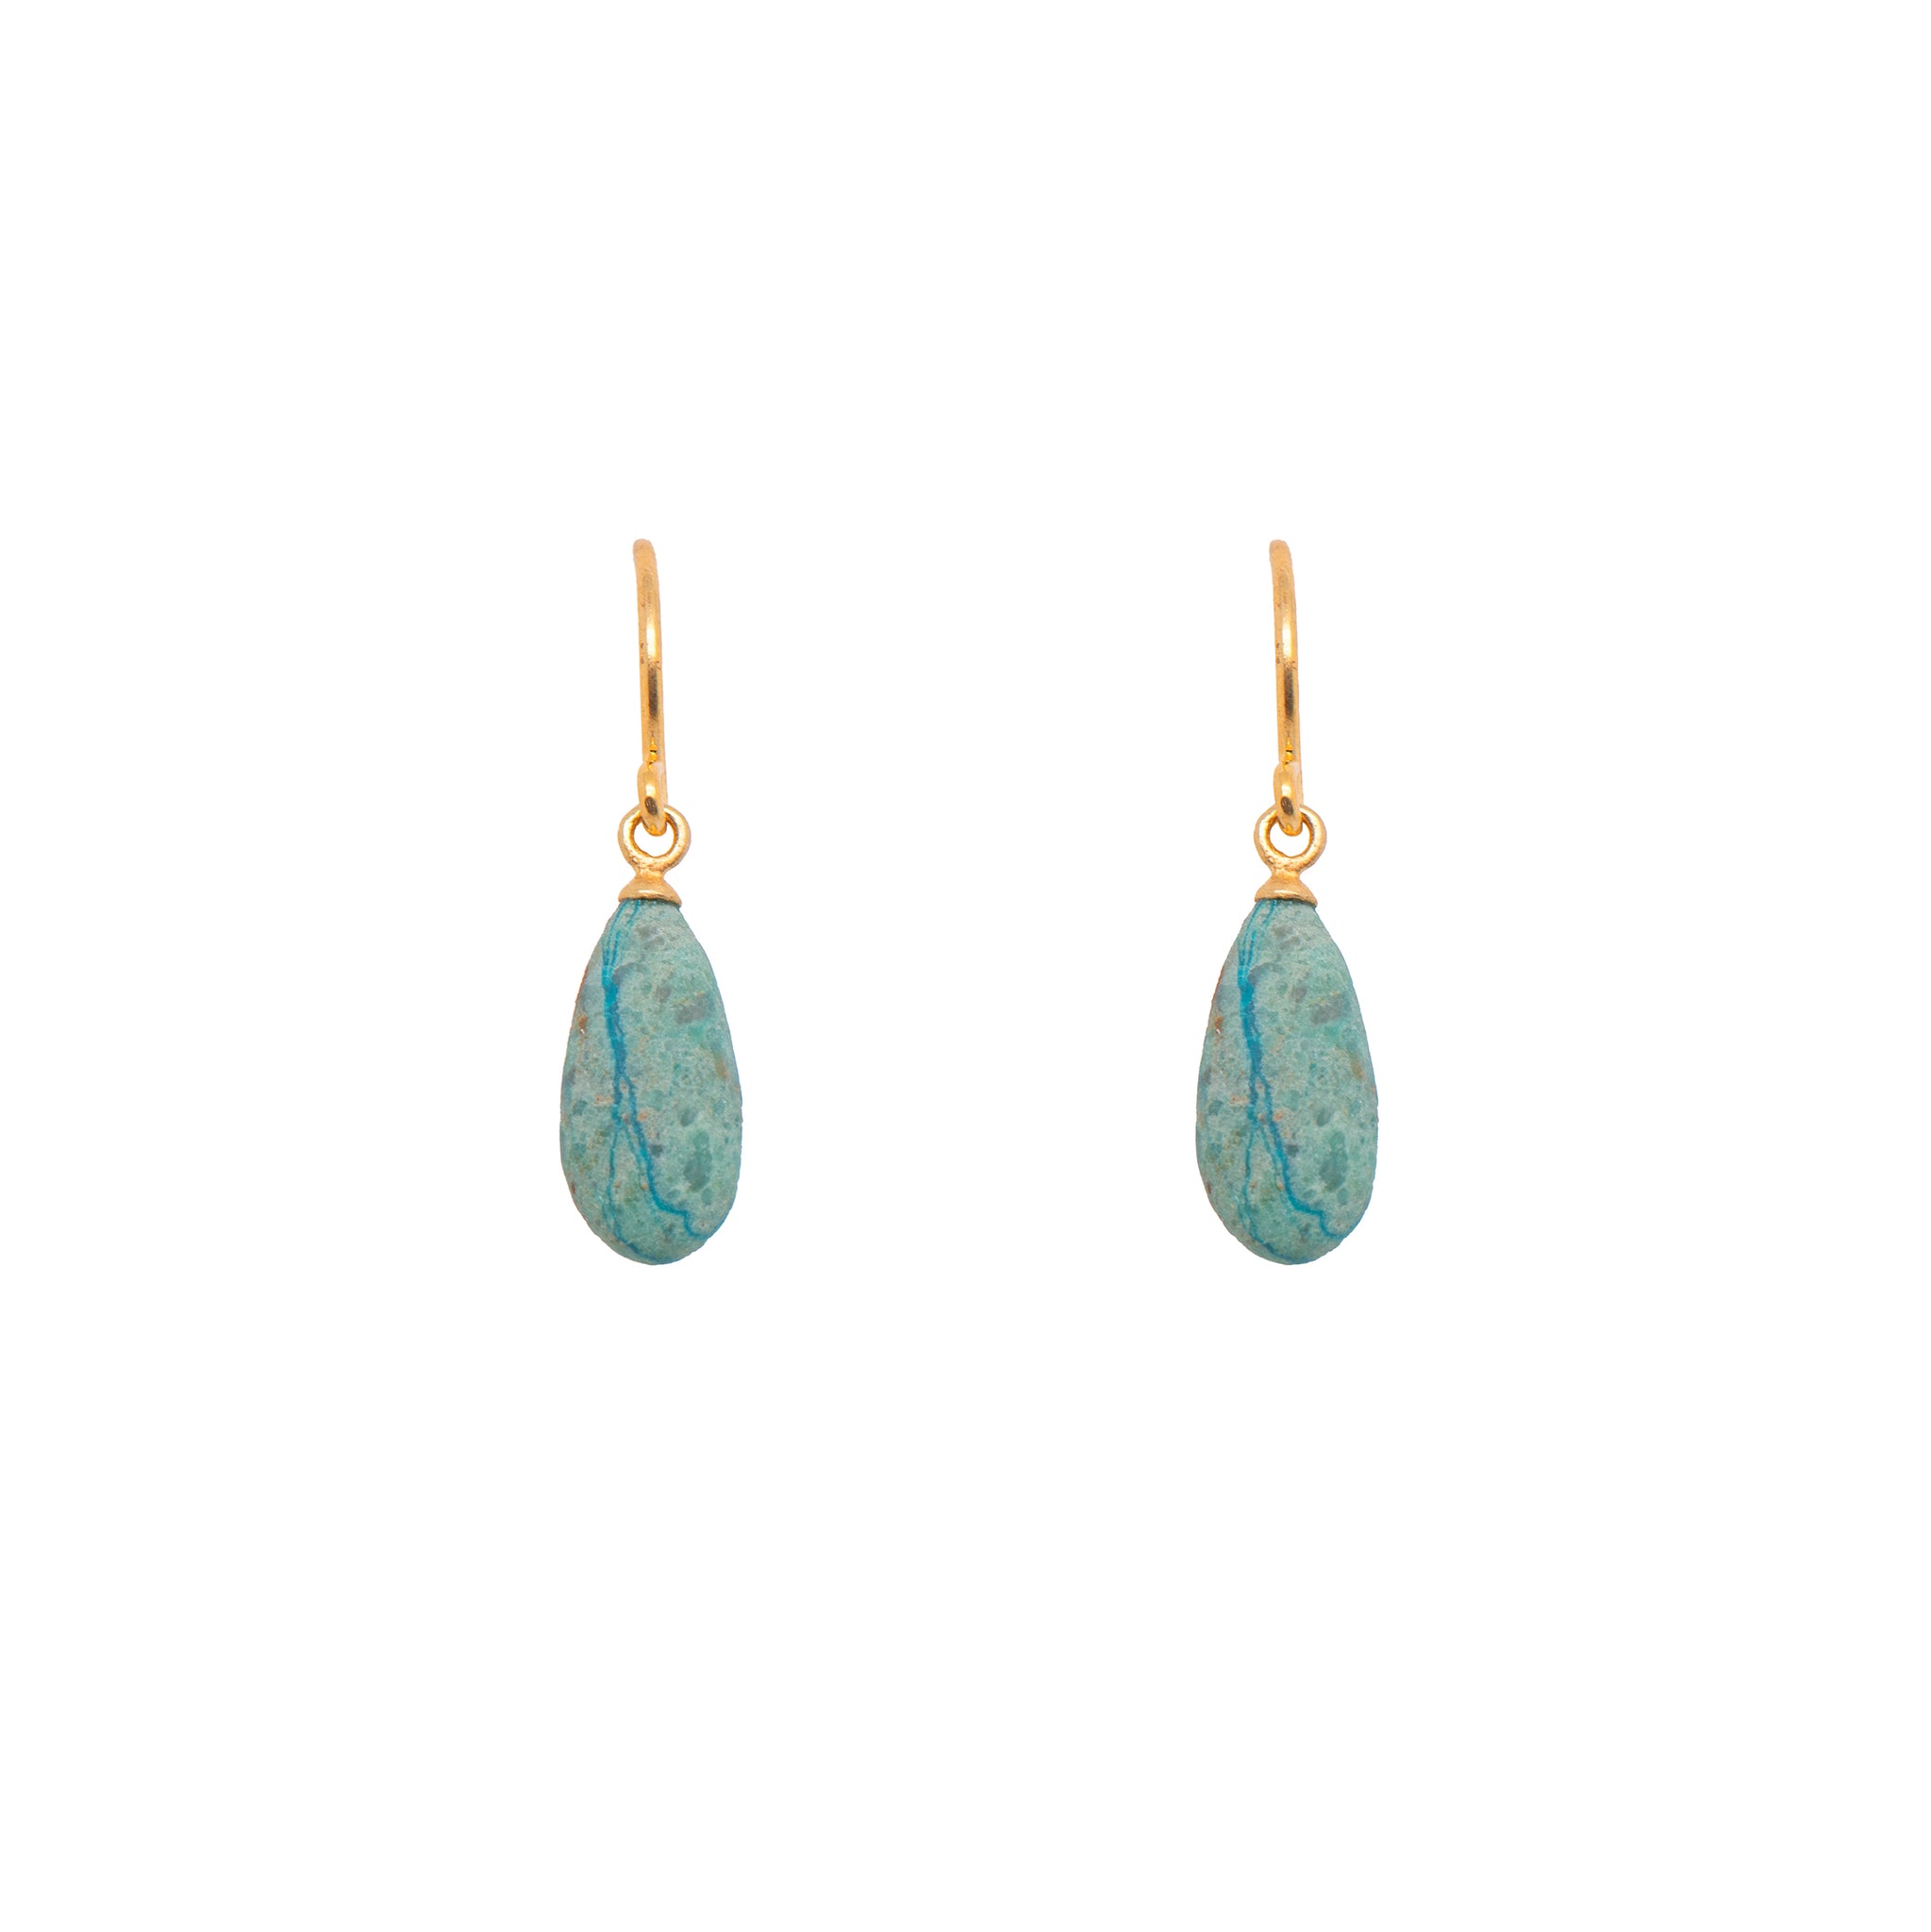 Chrysocolla French Wire Earrings Fair Trade 24K Gold Vermeil